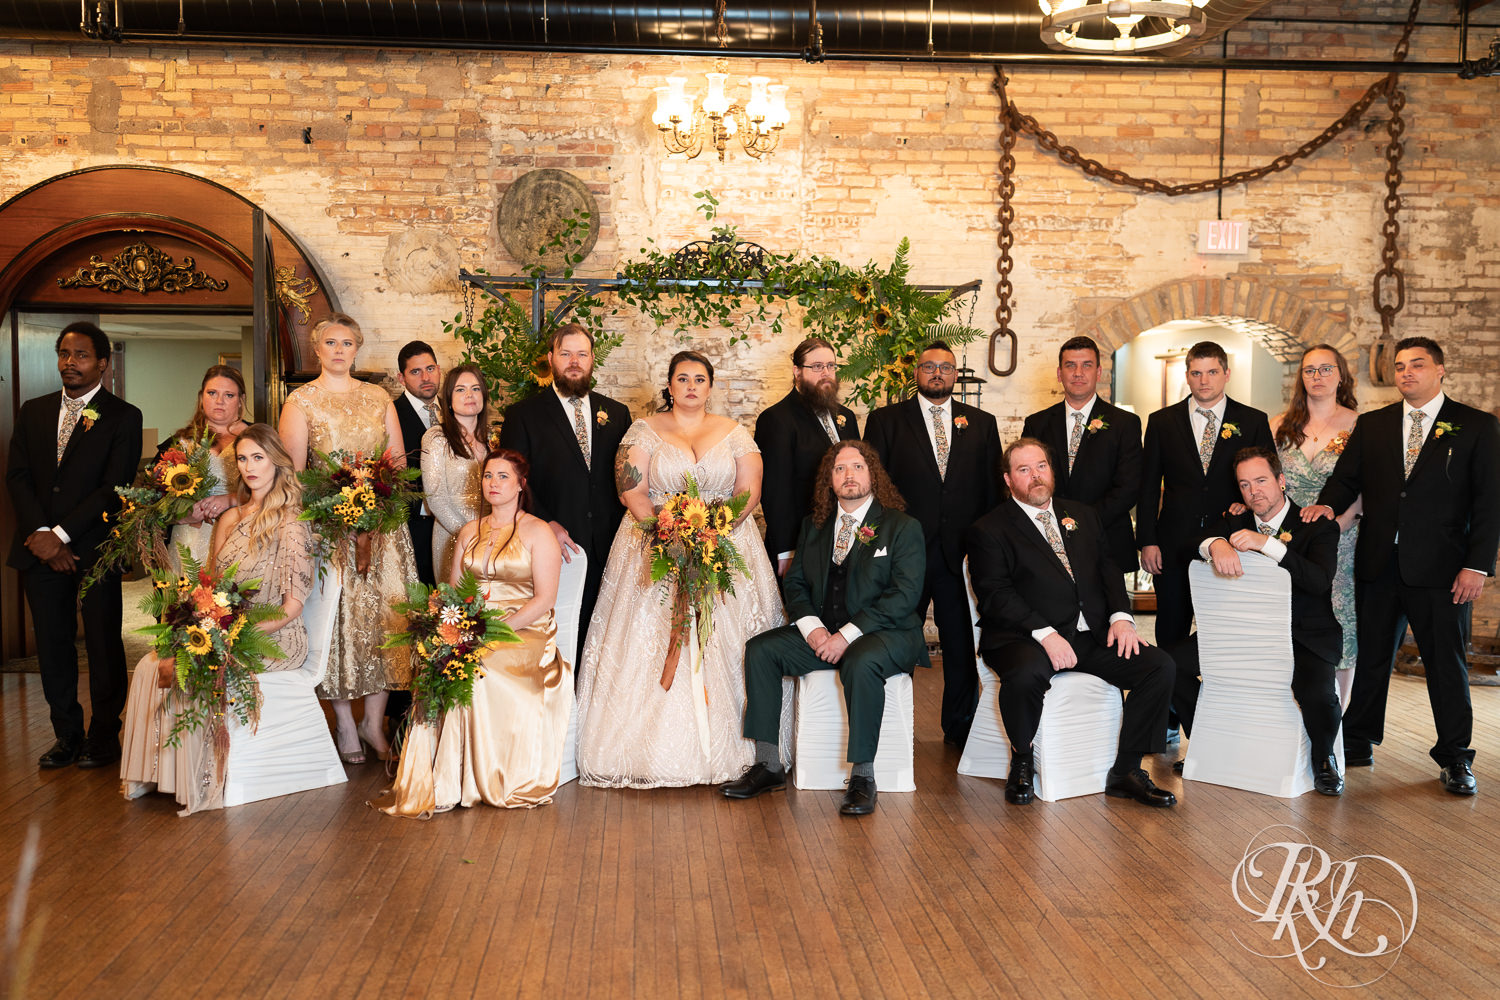 Plus size bride and groom smile with wedding party at Kellerman's Event Center in White Bear Lake, Minnesota.